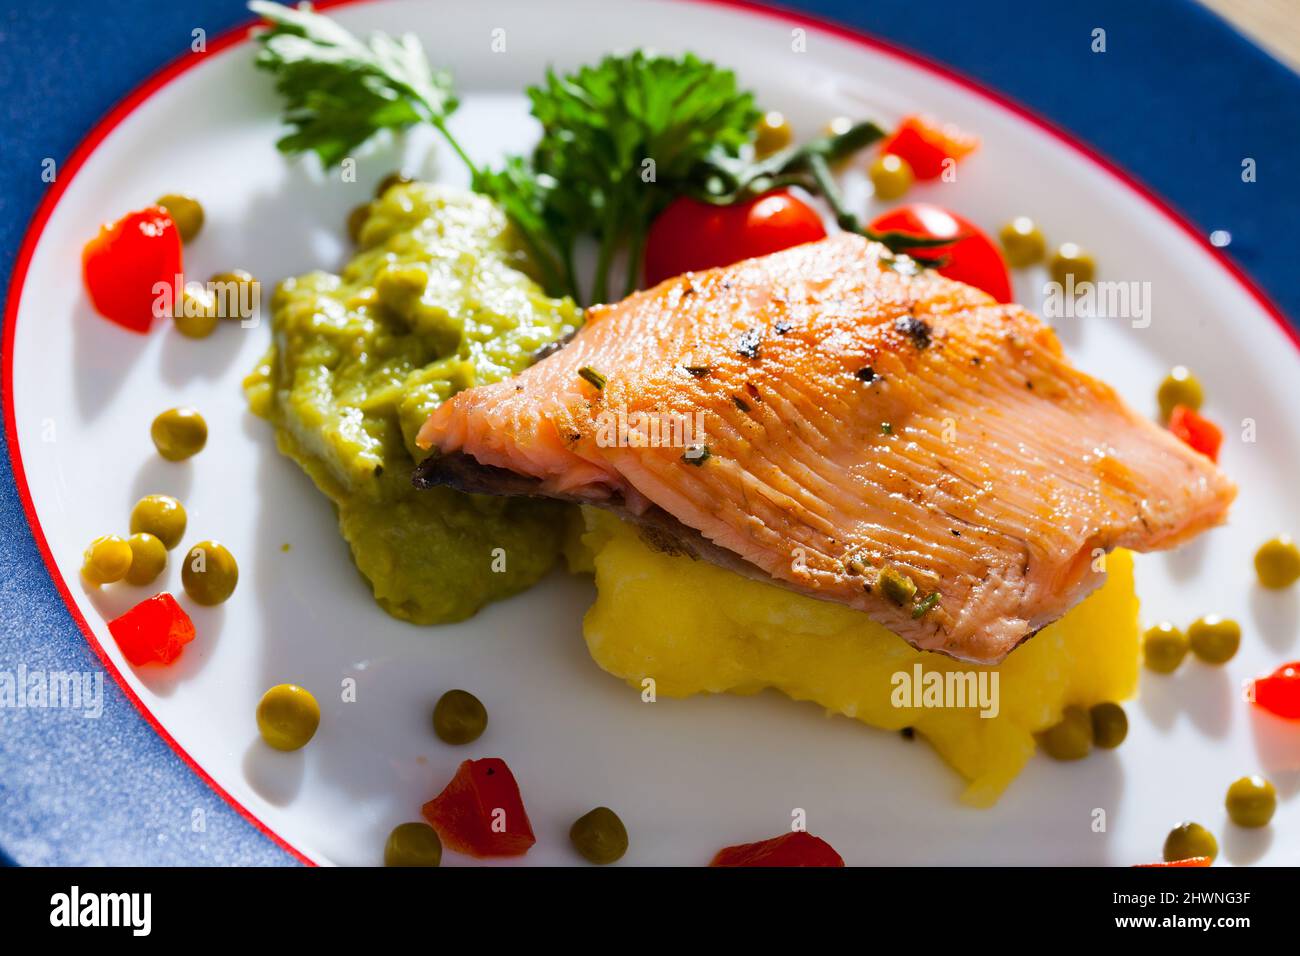 Tasty fried trout fillet served mashed potatoes, guacamole and greens on plate Stock Photo